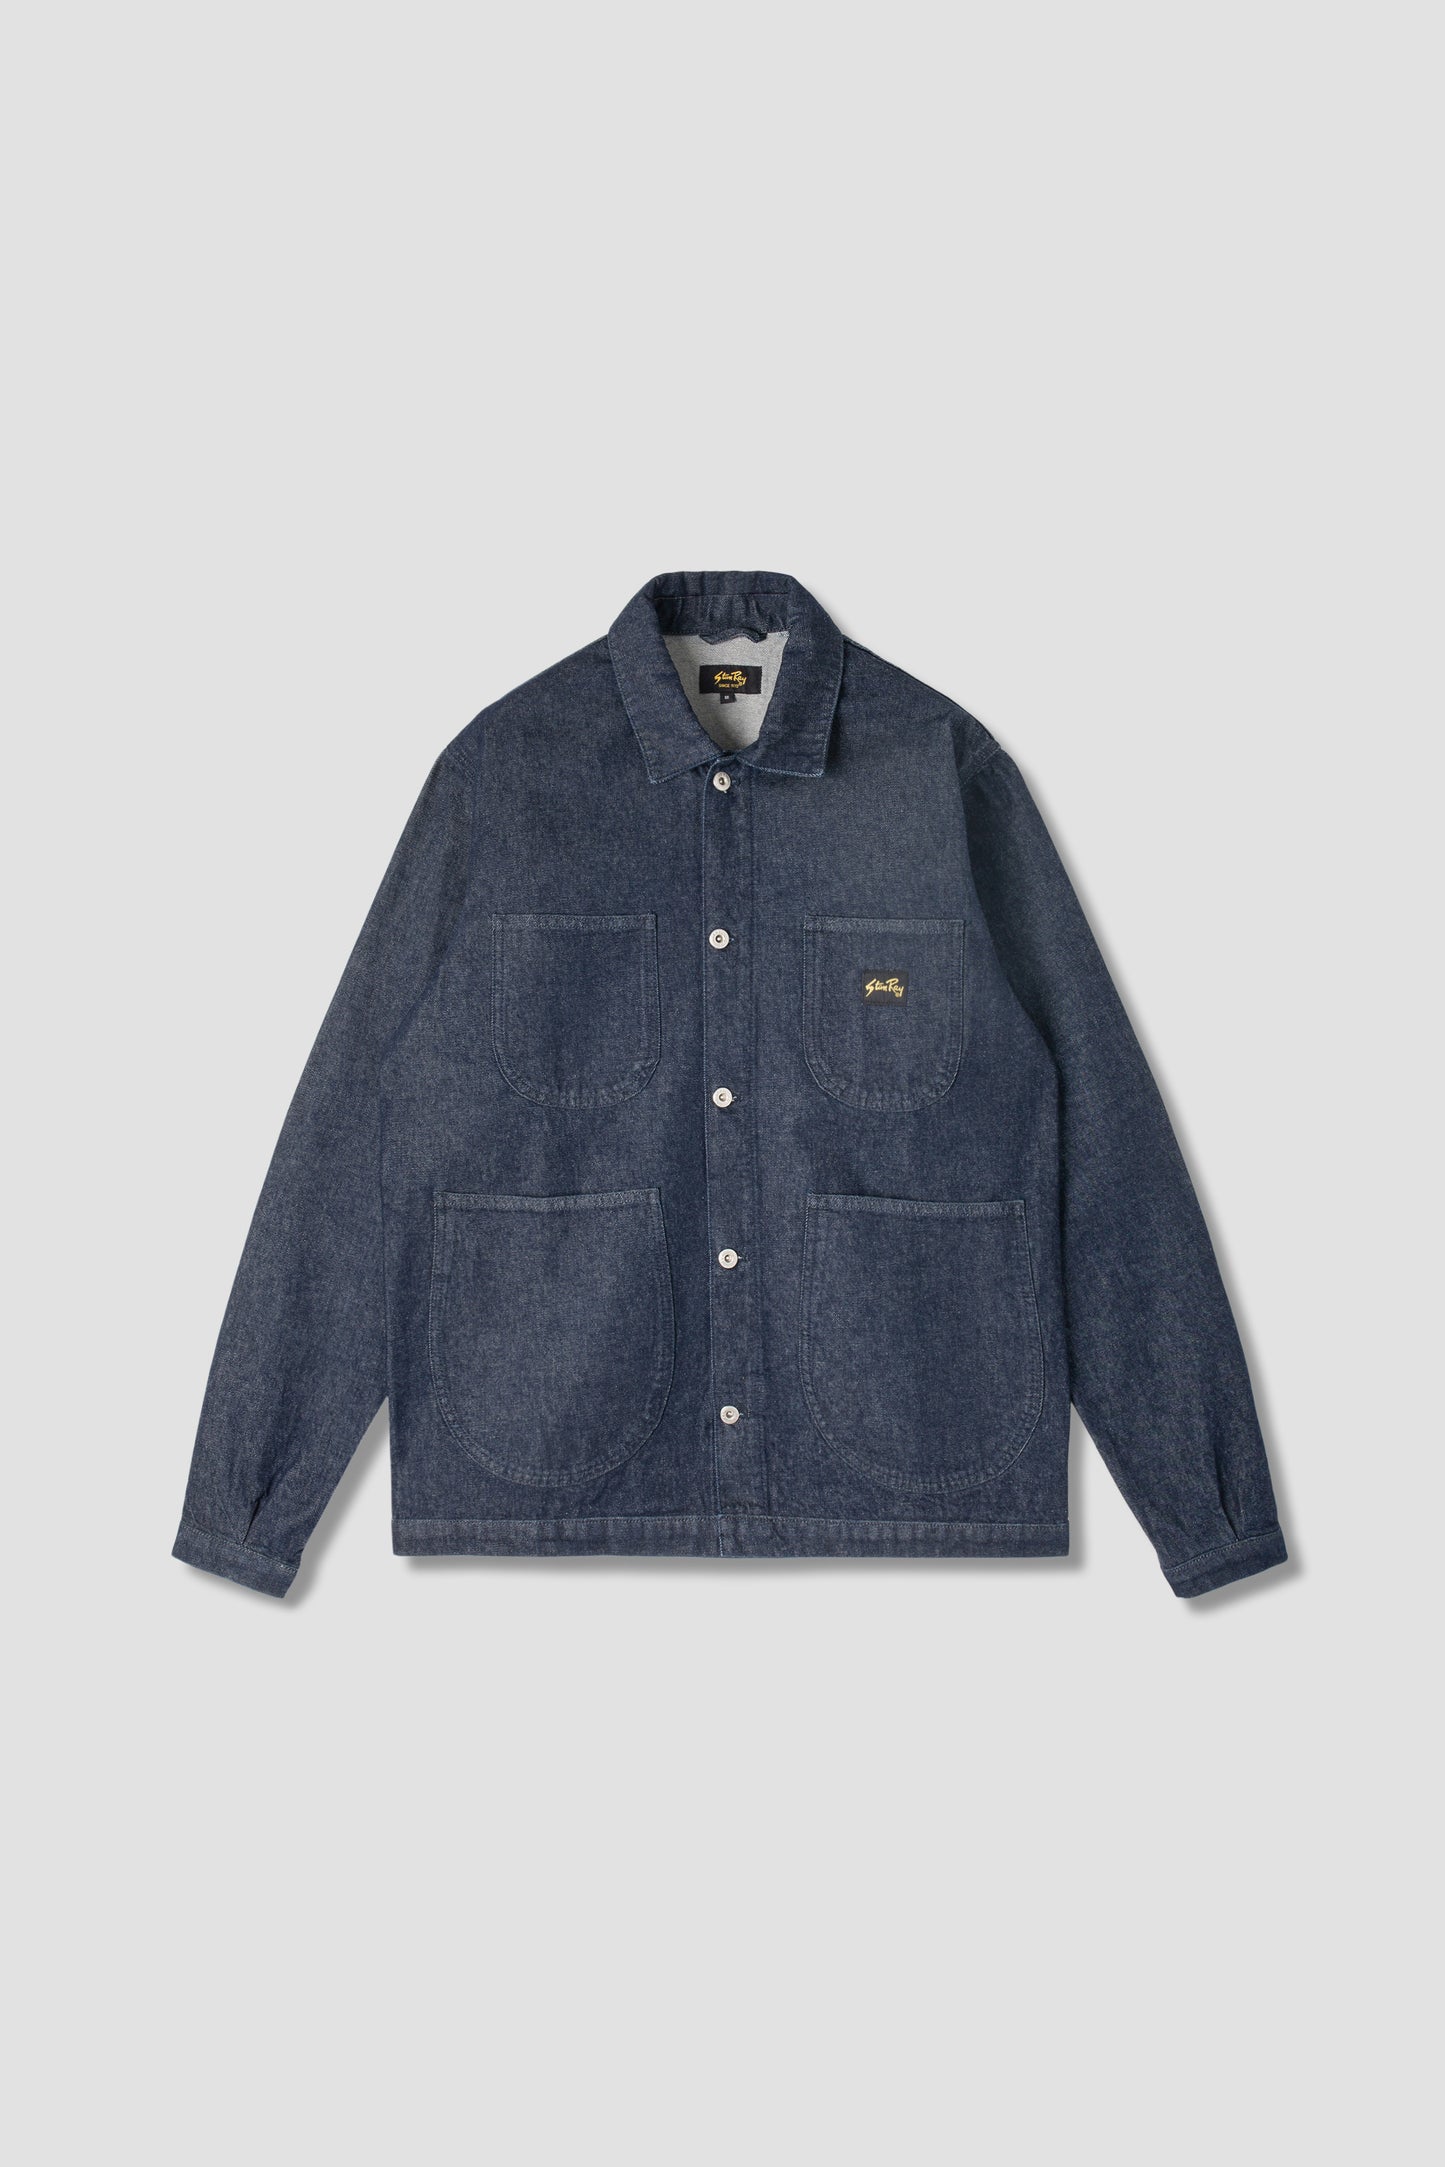 Coverall Jacket (Unlined) (Raw Denim)